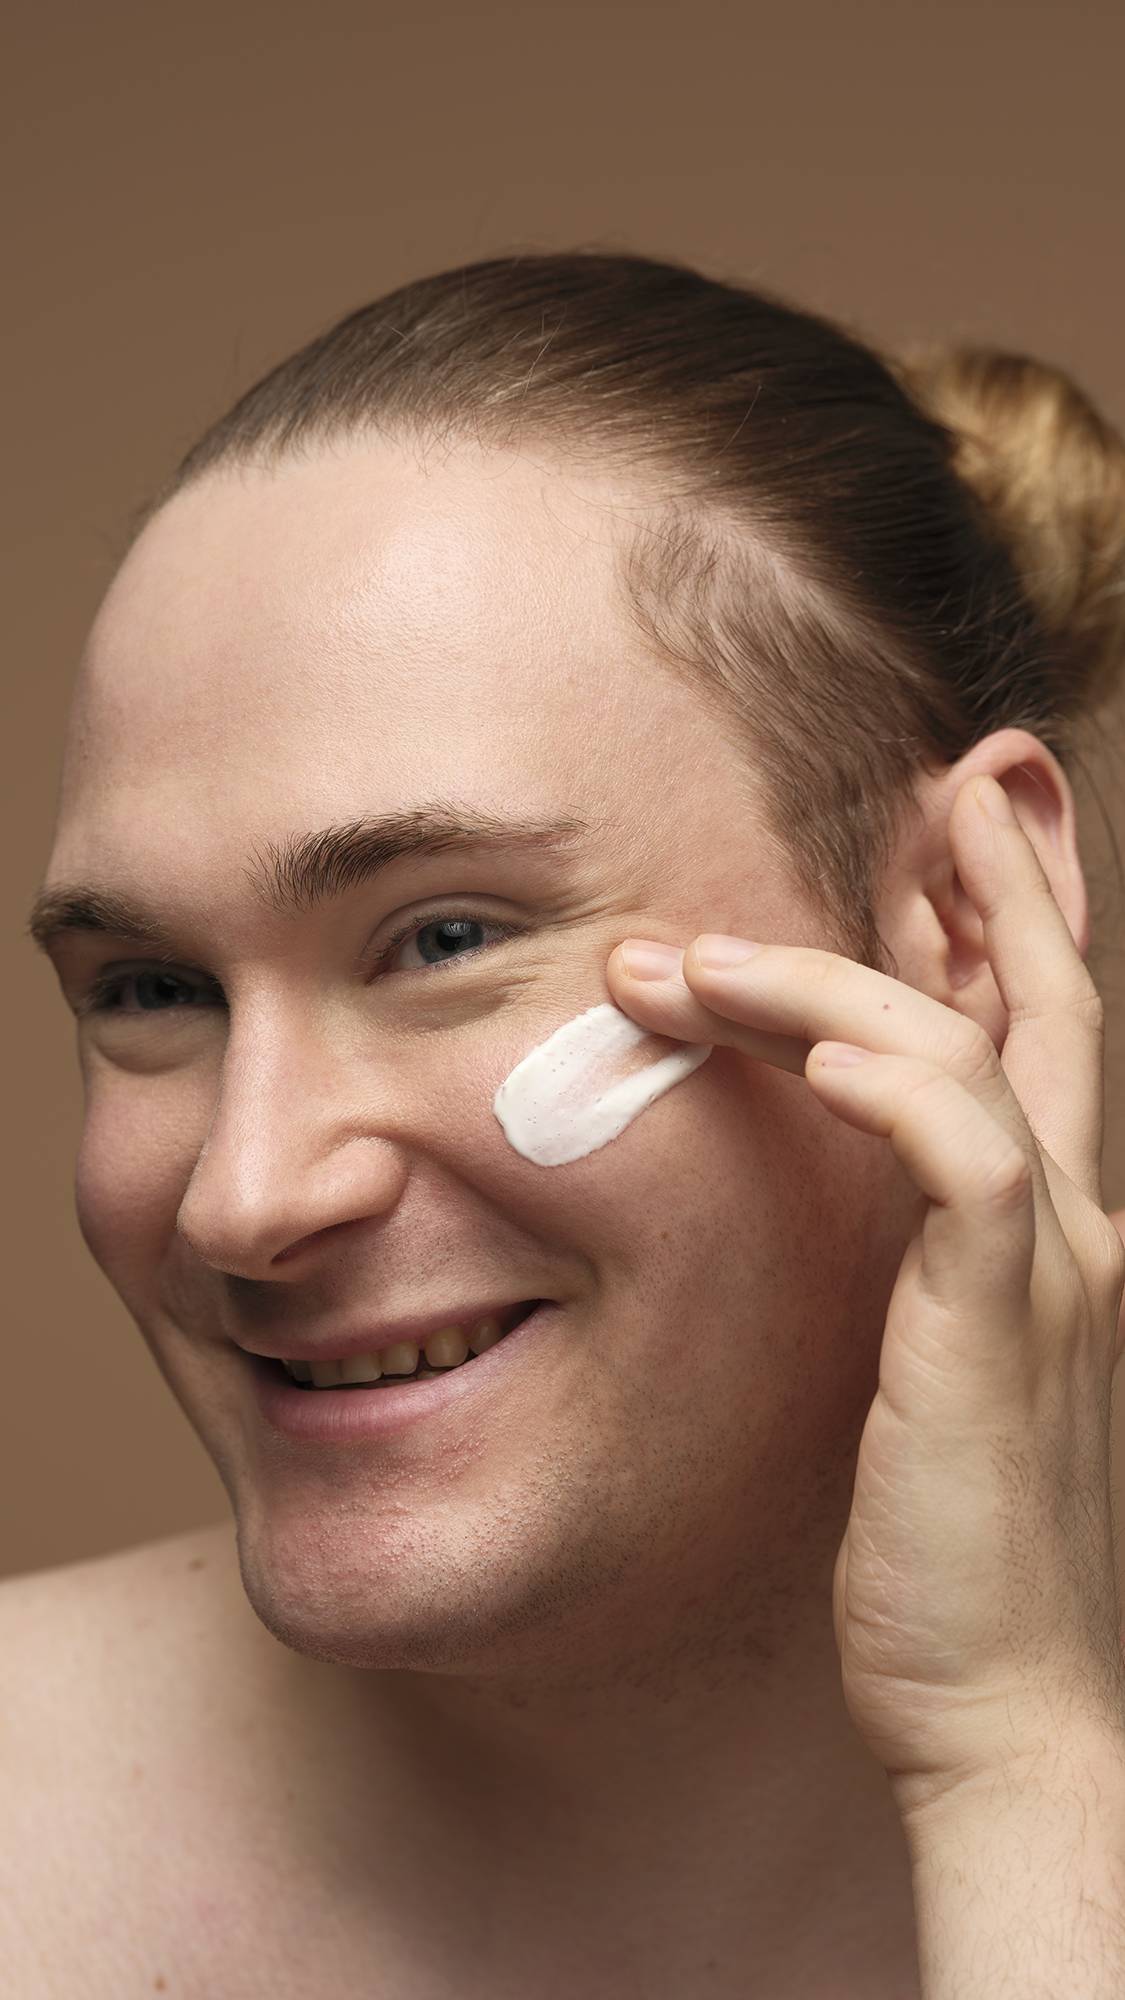 A close-up image of the model's smiling face as they start to apply the Cosmetic Lad self-preserving moisturiser to one cheek. They are on a warm, earthy-brown background and their hair is tied back.